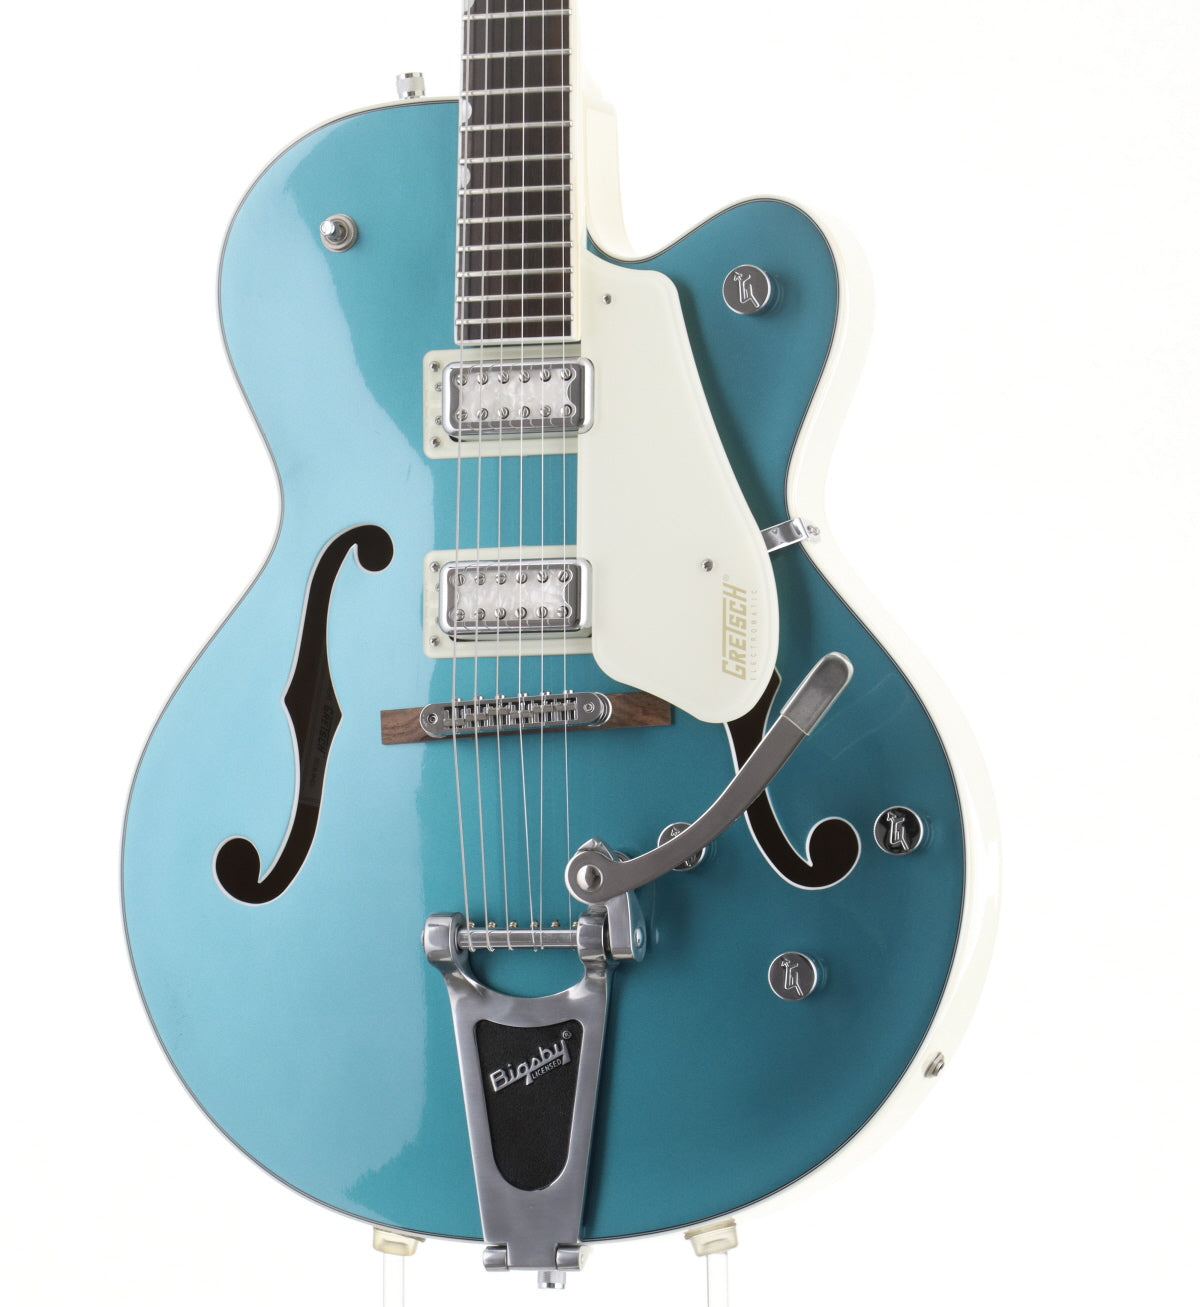 [SN KS21034058] USED ELECTROMATIC / G5410T Limited Edition Tri-Five w/Bigsby Two-Tone Ocean Turquoise/Vintage White [08]